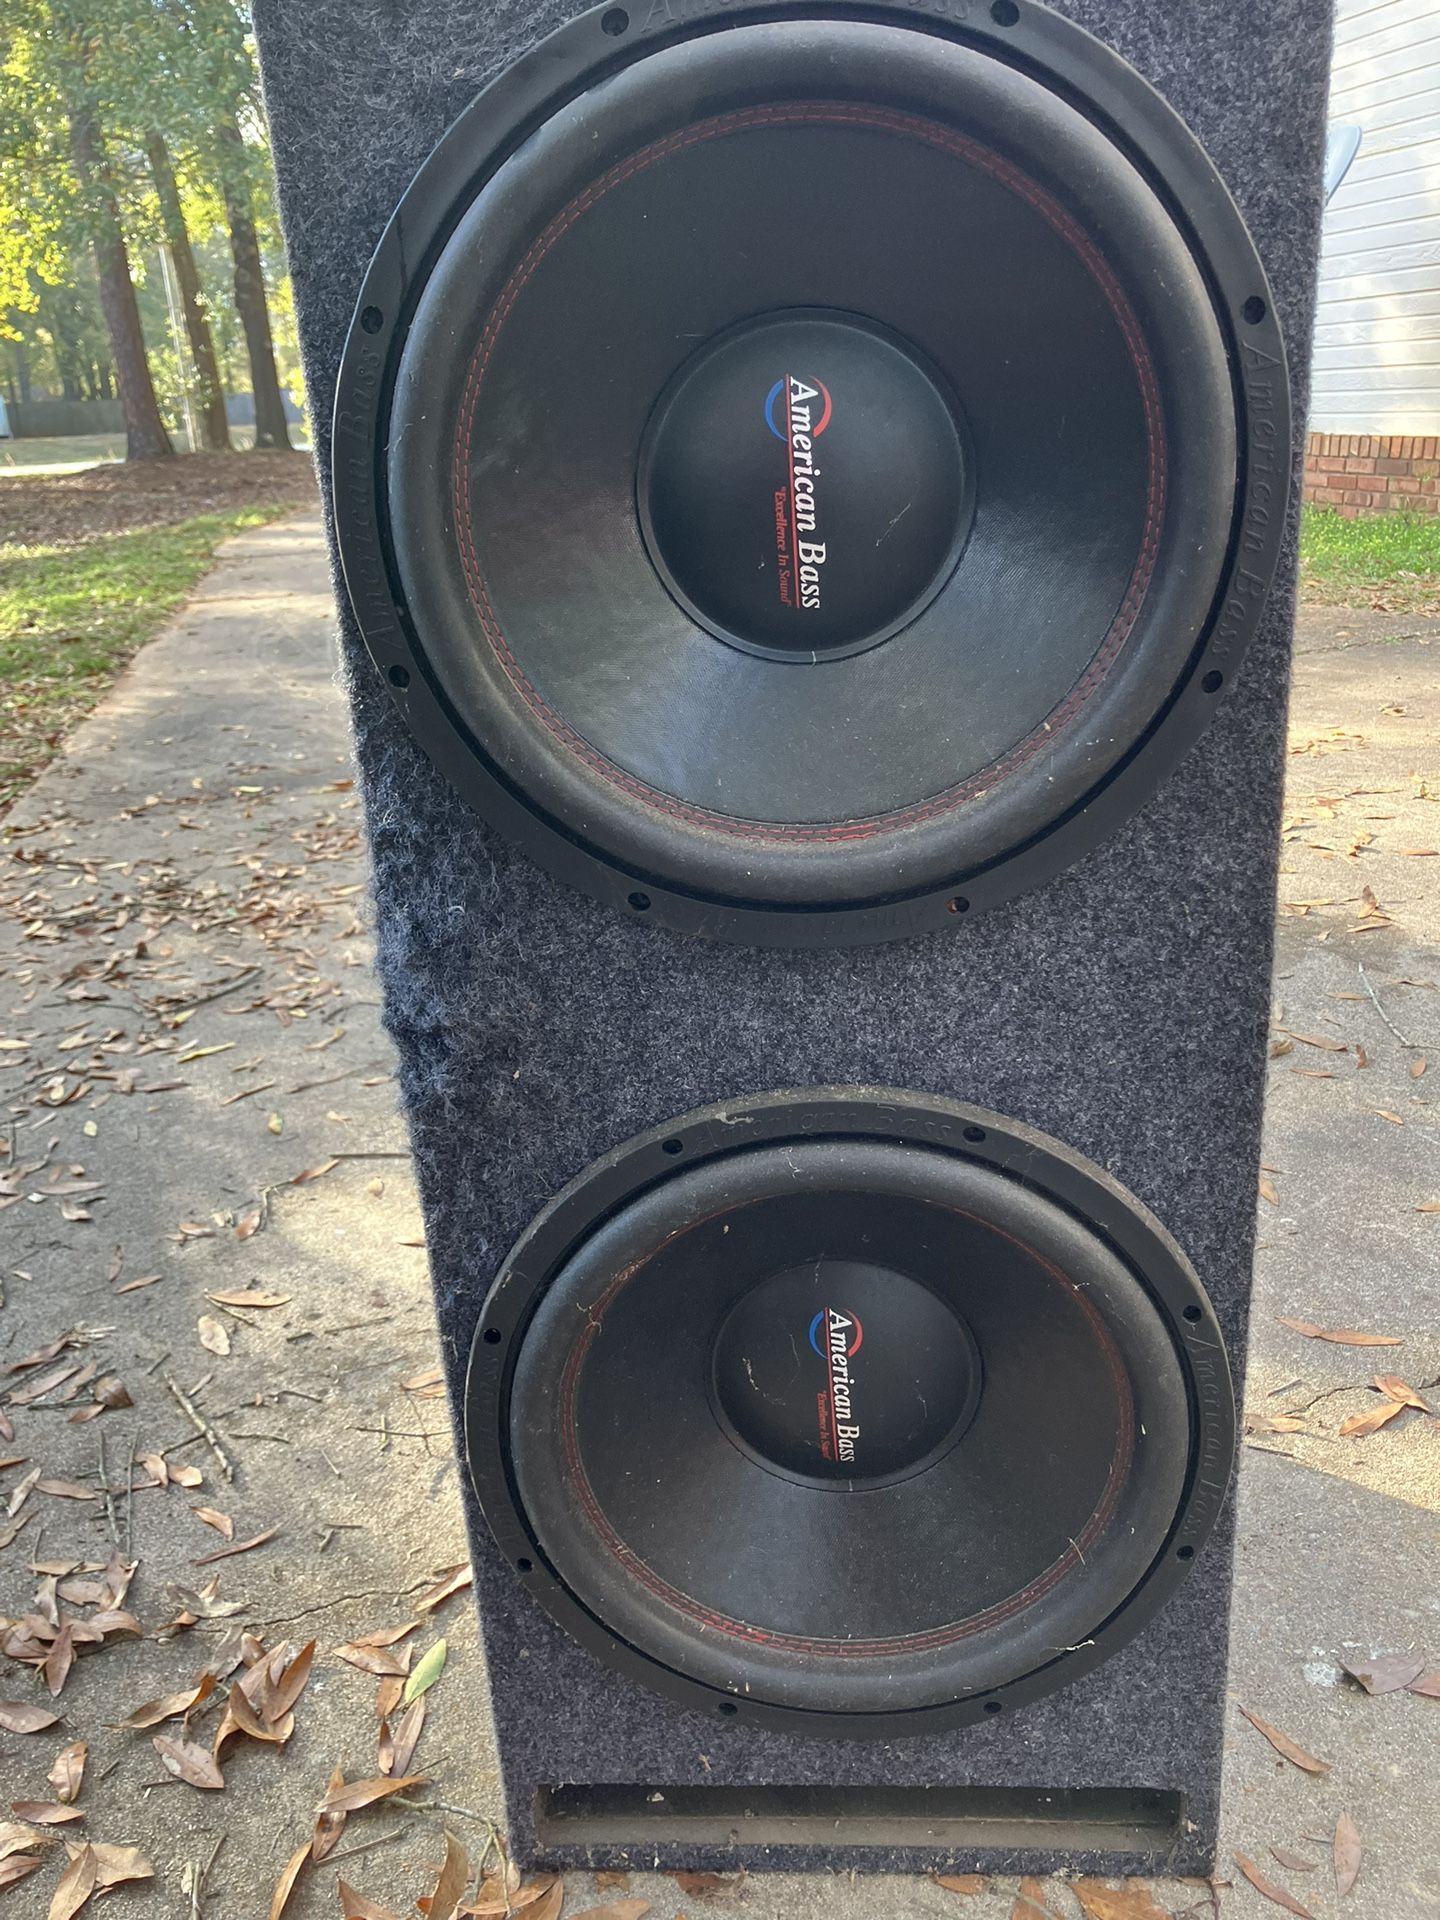 American bass 15” Subwoofers